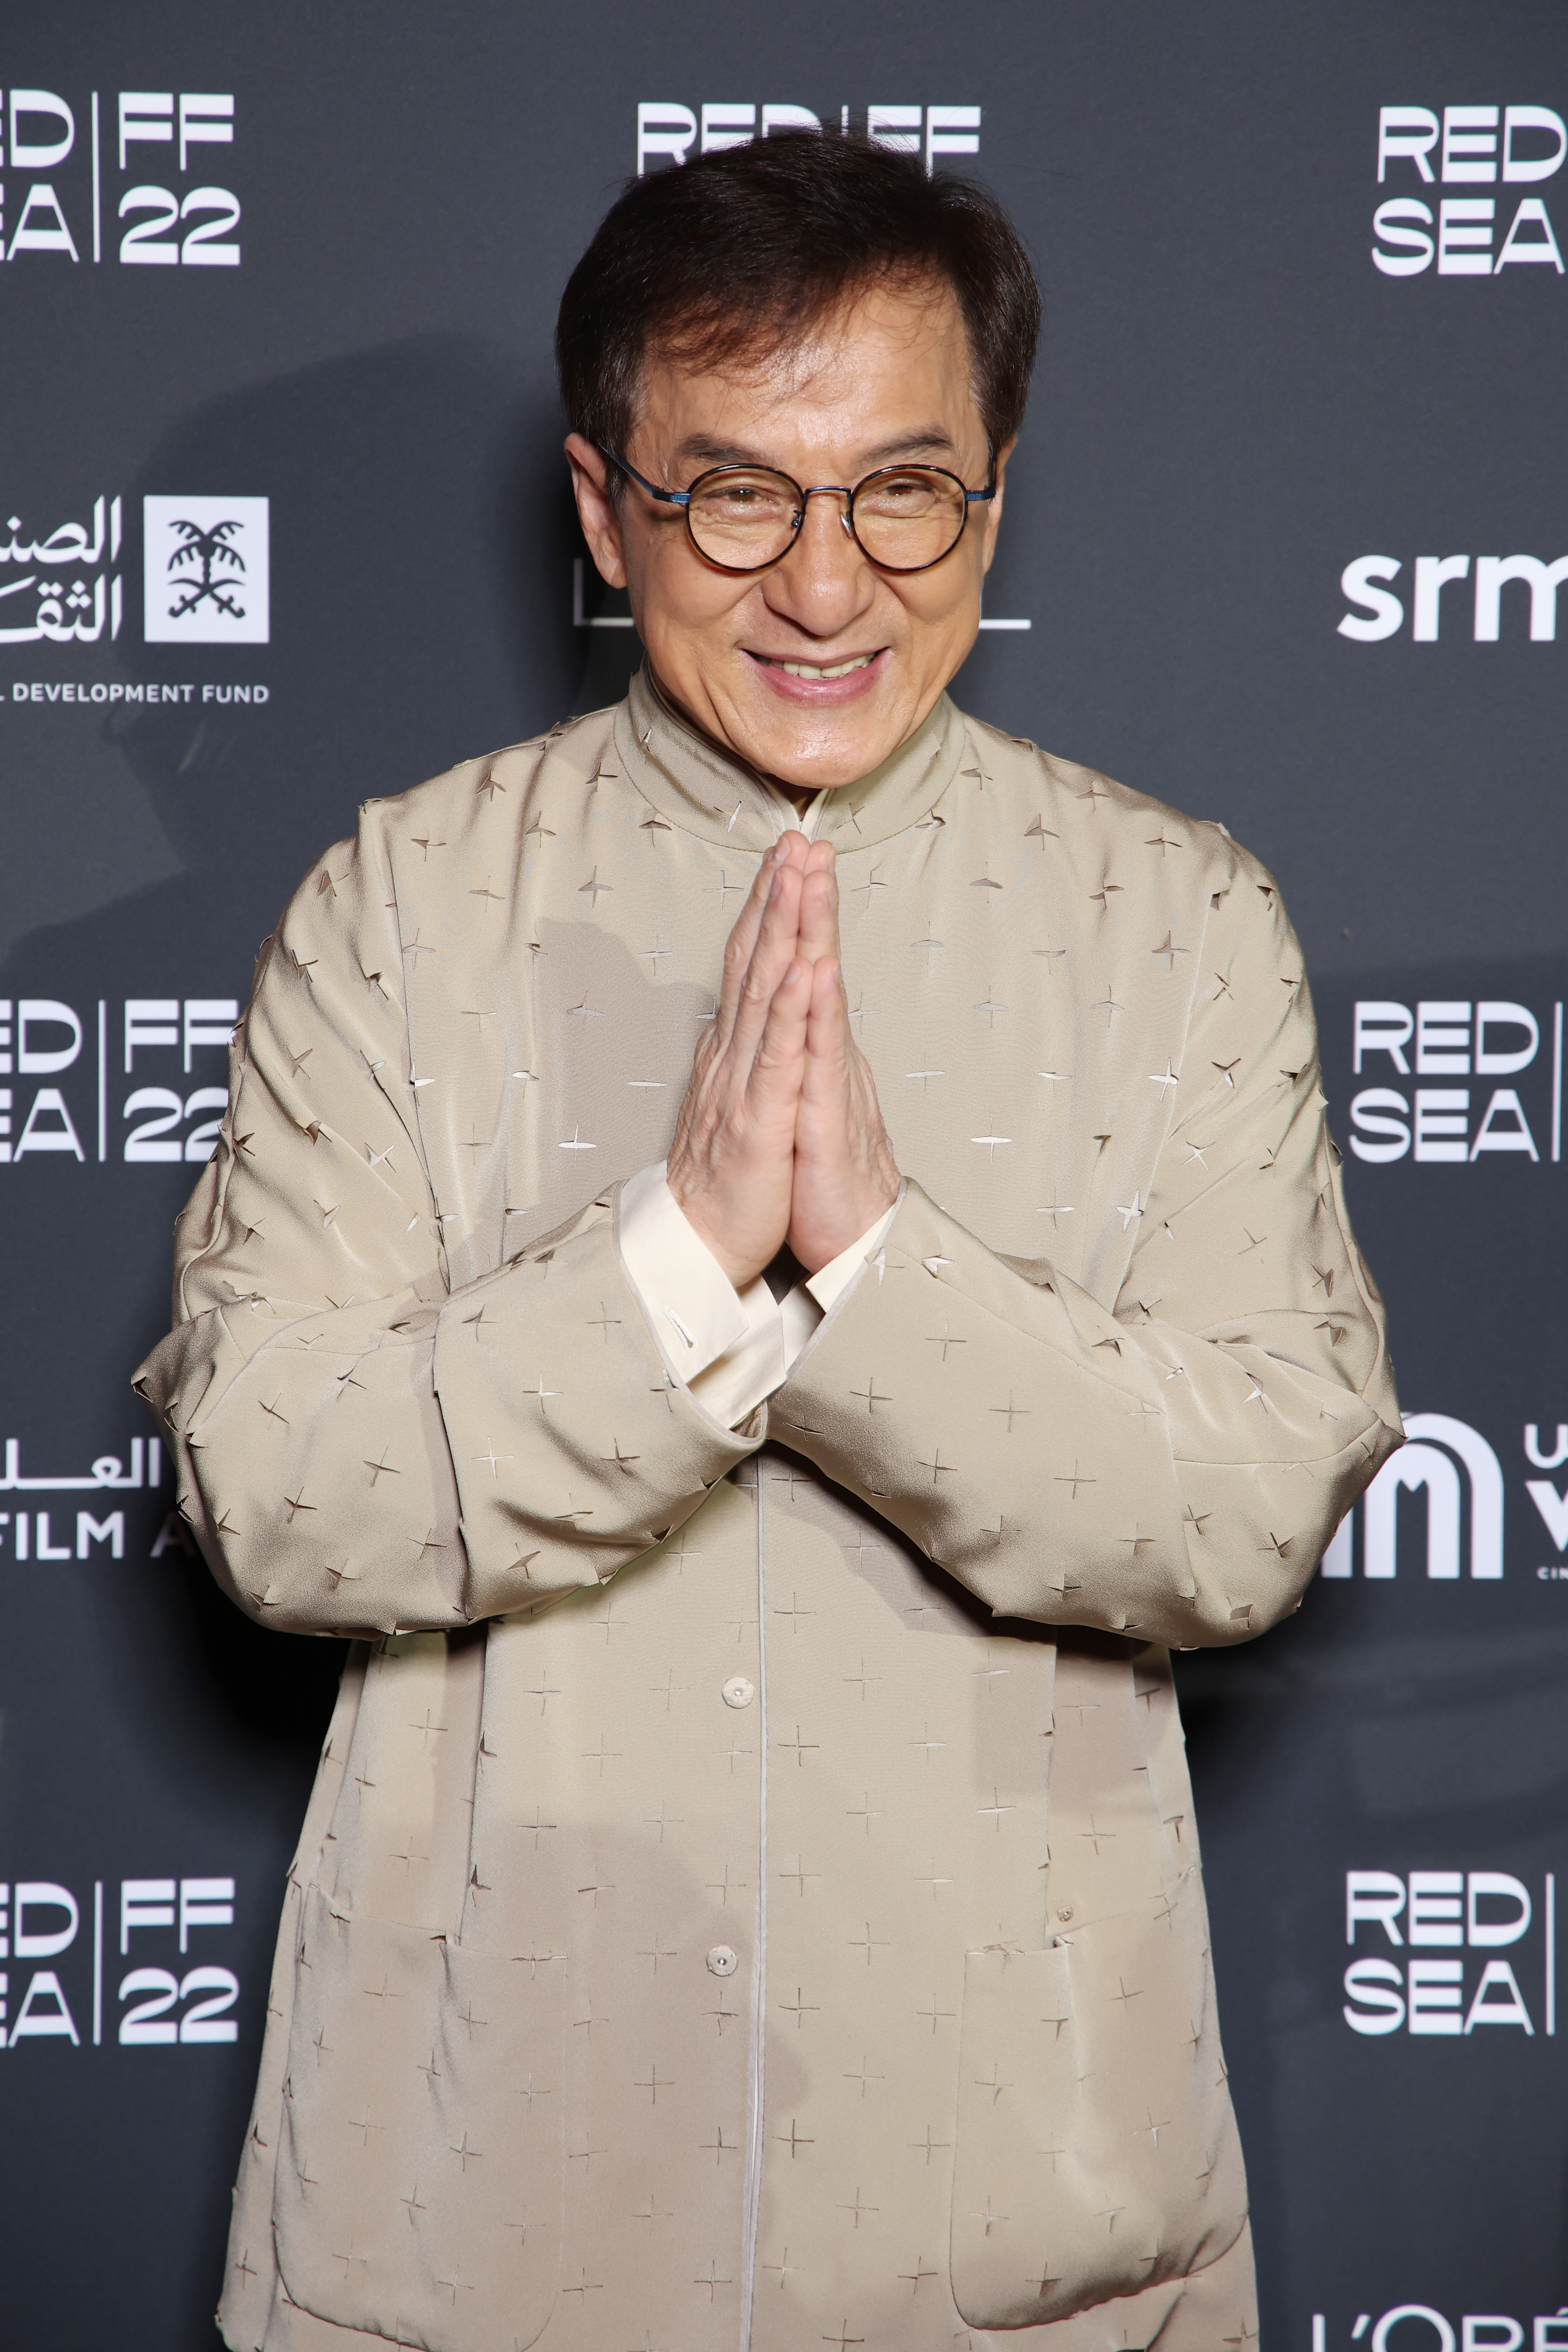 Jackie Chan on the red carpet at the Closing Night Gala Red Carpet at the Red Sea International Film Festival on December 08, 2022 in Jeddah, Saudi Arabia | Source: Getty Images